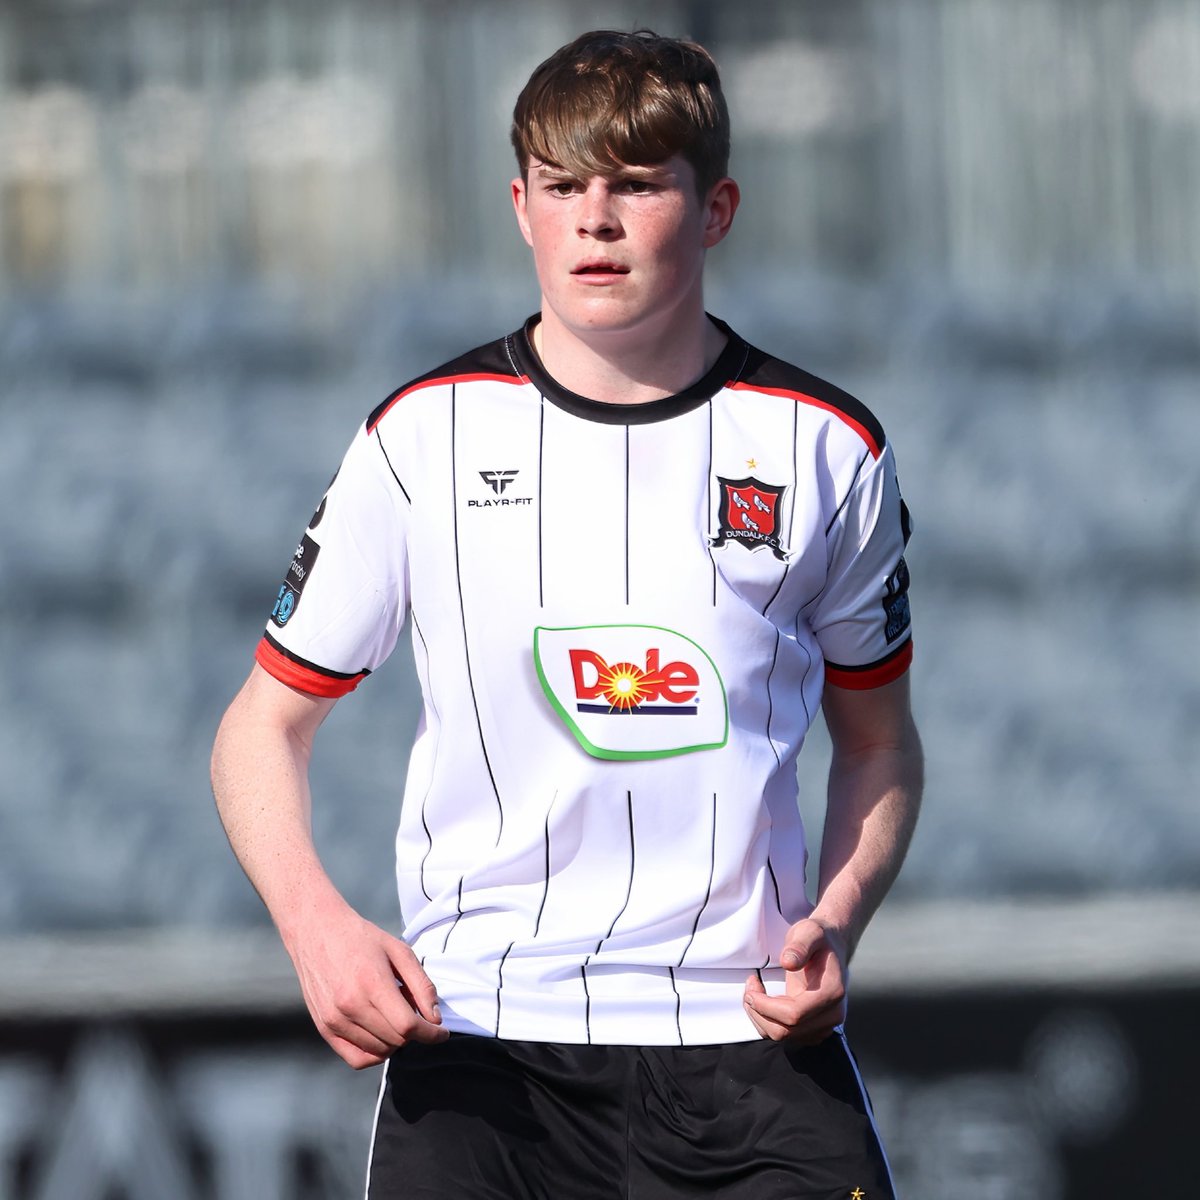 🇮🇪 Vinnie Leonard, who became the youngest player to make a competitive appearance for the club in the Leinster Senior Cup tie with Bohemians earlier this year, has been named in the Republic of Ireland U16 squad for an upcoming Development Tournament in Portugal from May